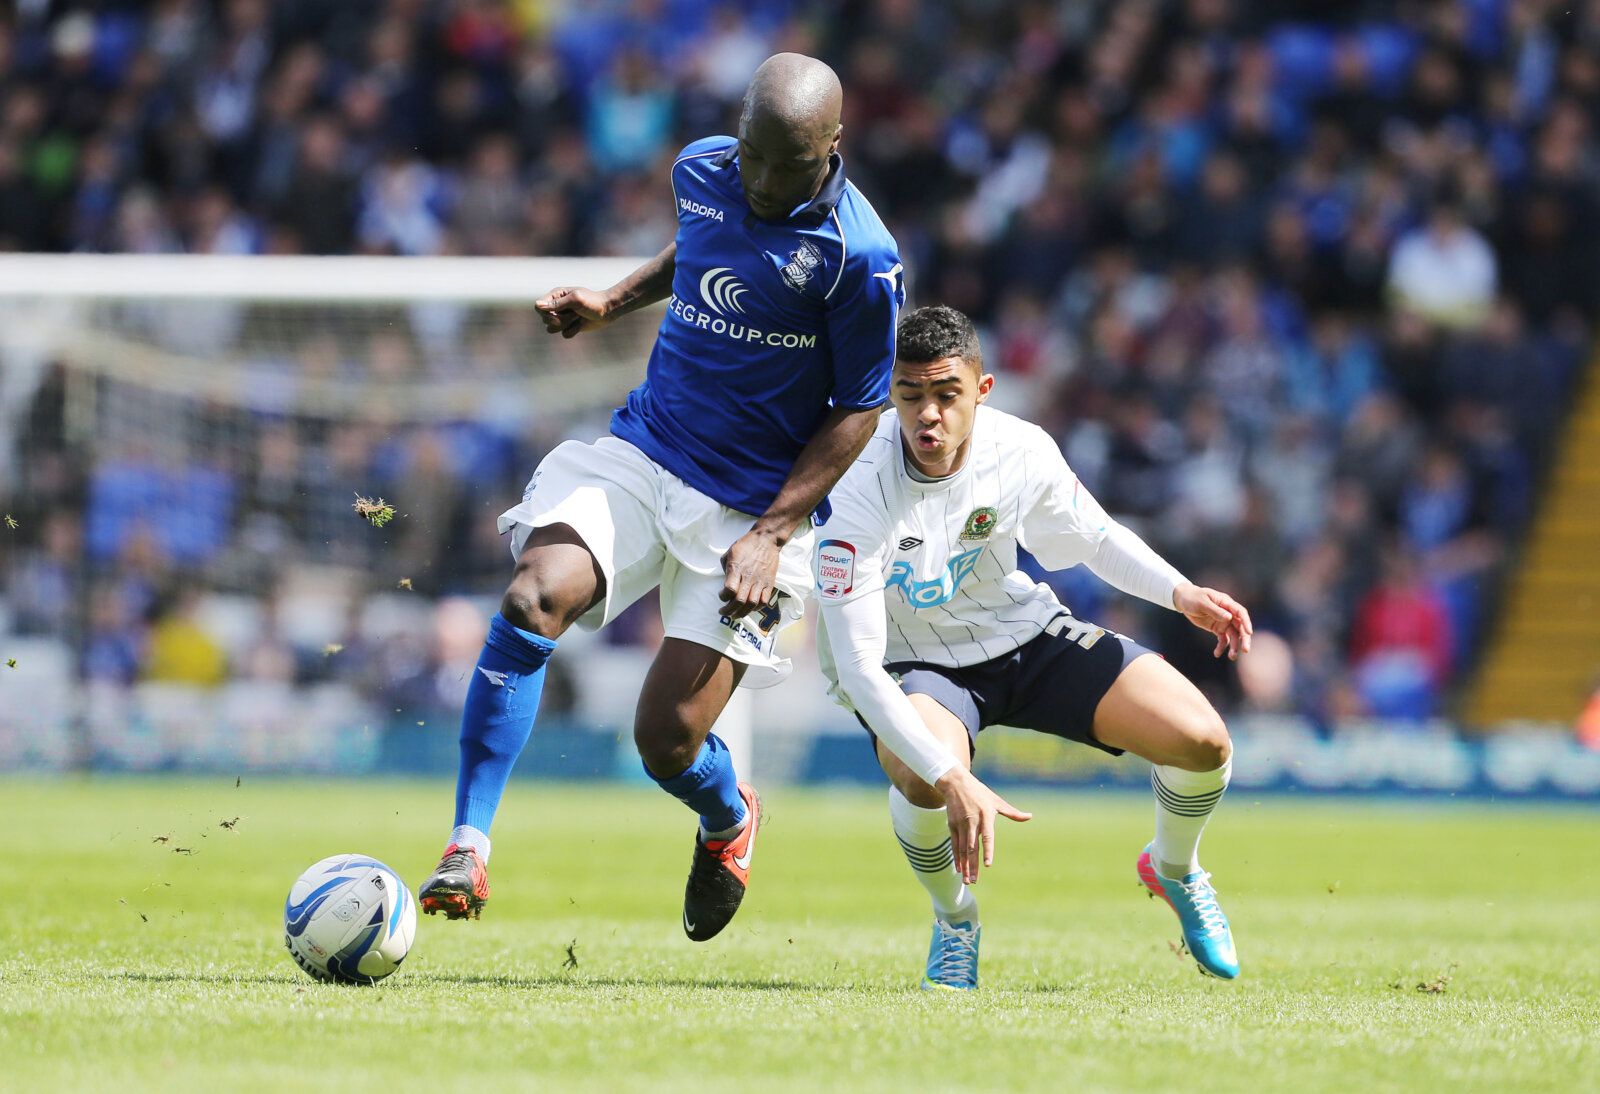 Football - Birmingham City v Blackburn Rovers - npower Football League Championship - St Andrews - 4/5/13 
Morgaro Gomis of Birmingham City (L) in action with Cameron Stewart of Blackburn Rovers  
Mandatory Credit: Action Images / John Clifton 
Livepic 
EDITORIAL USE ONLY. No use with unauthorized audio, video, data, fixture lists, club/league logos or live services. Online in-match use limited to 45 images, no video emulation. No use in betting, games or single club/league/player publications. 